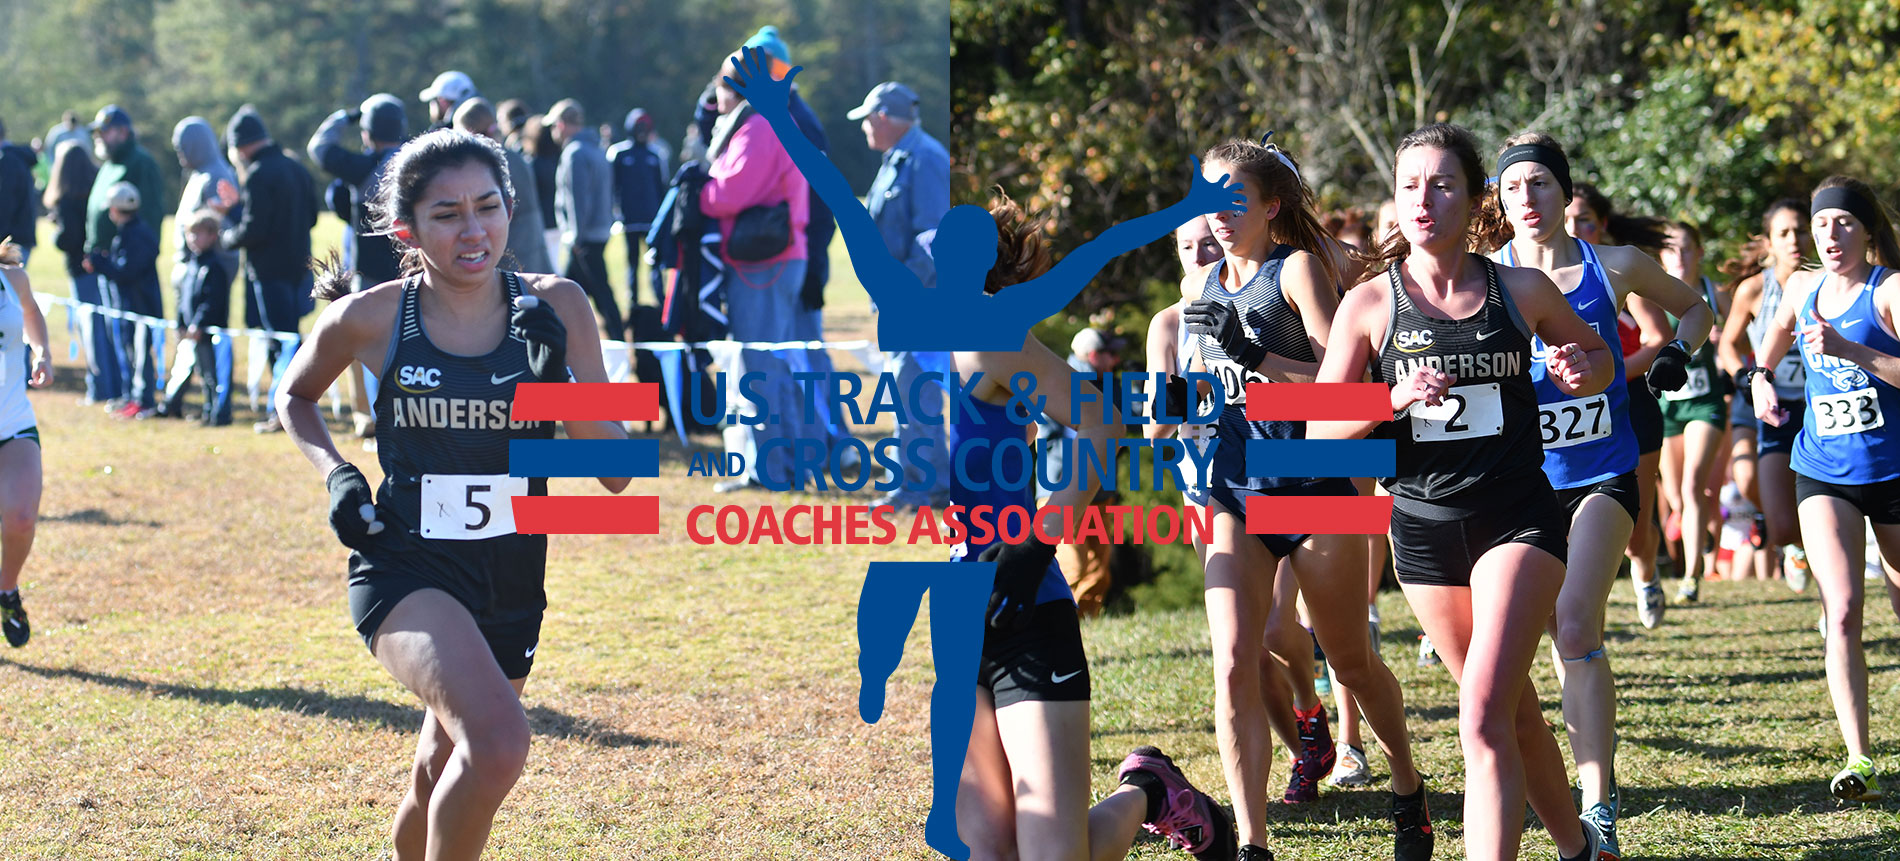 Evans and Rish Earn Cross Country All-Region Honors